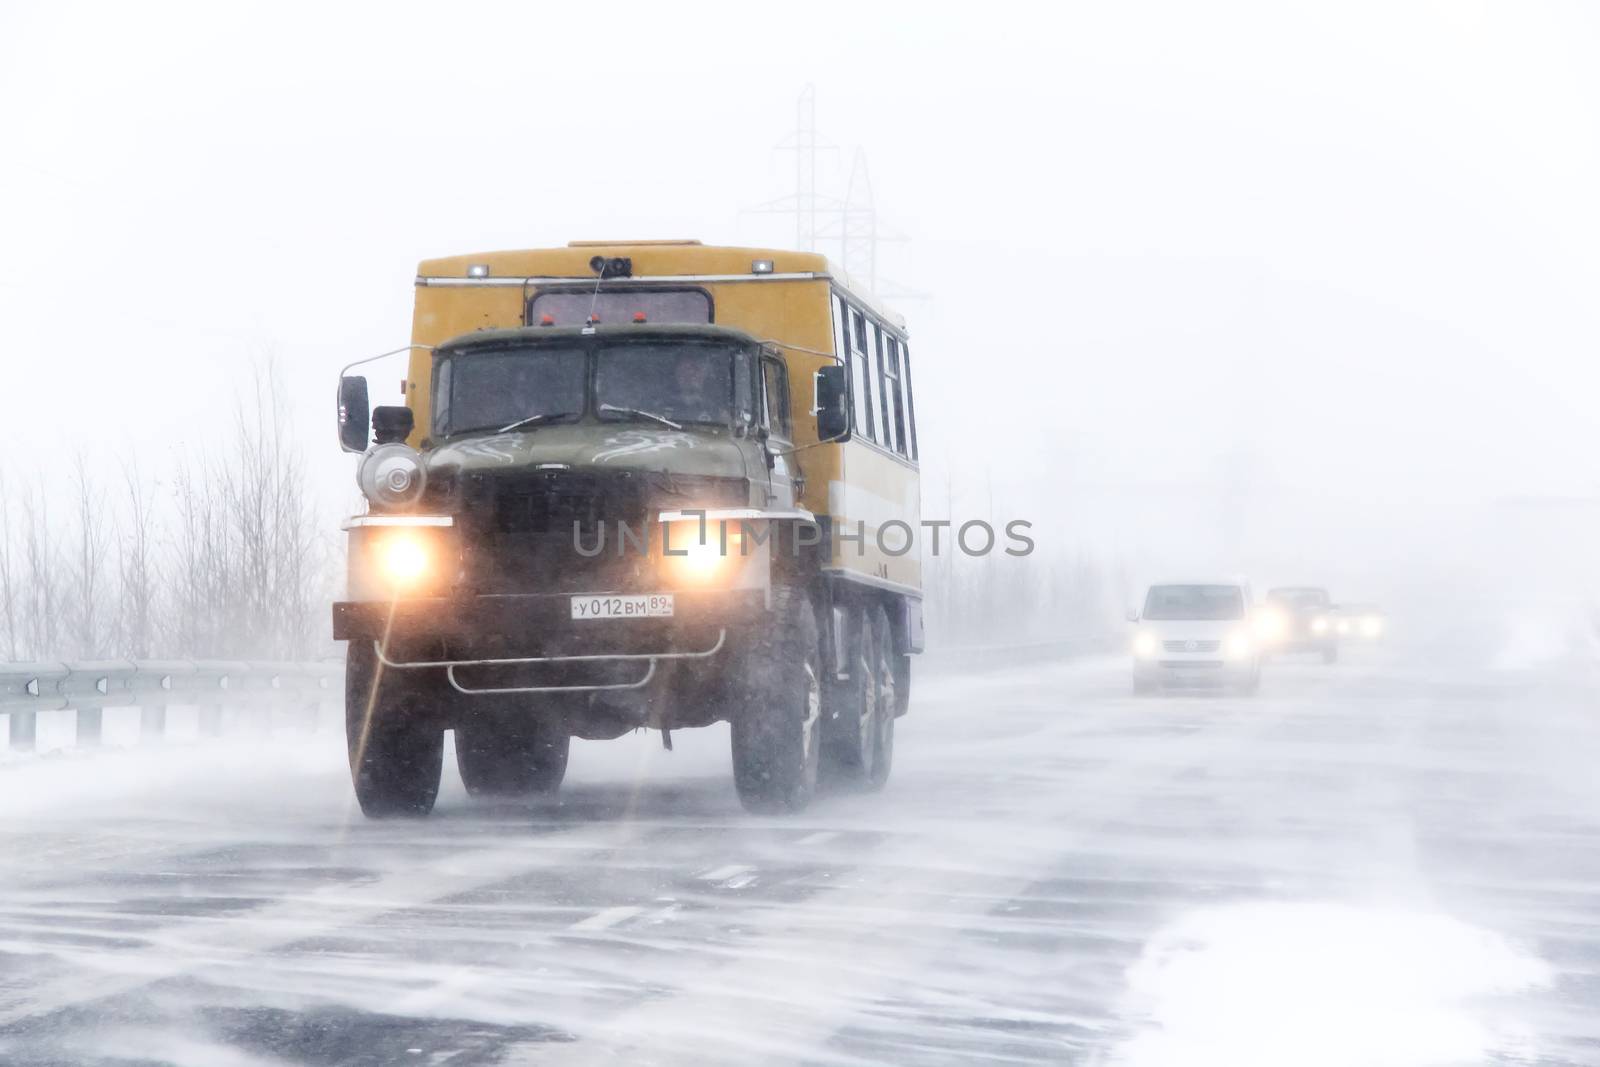 NOVYY URENGOY, RUSSIA - OCTOBER 20, 2013: Off-road bus Ural 4320 at the interurban freeway during a heavy blizzard.